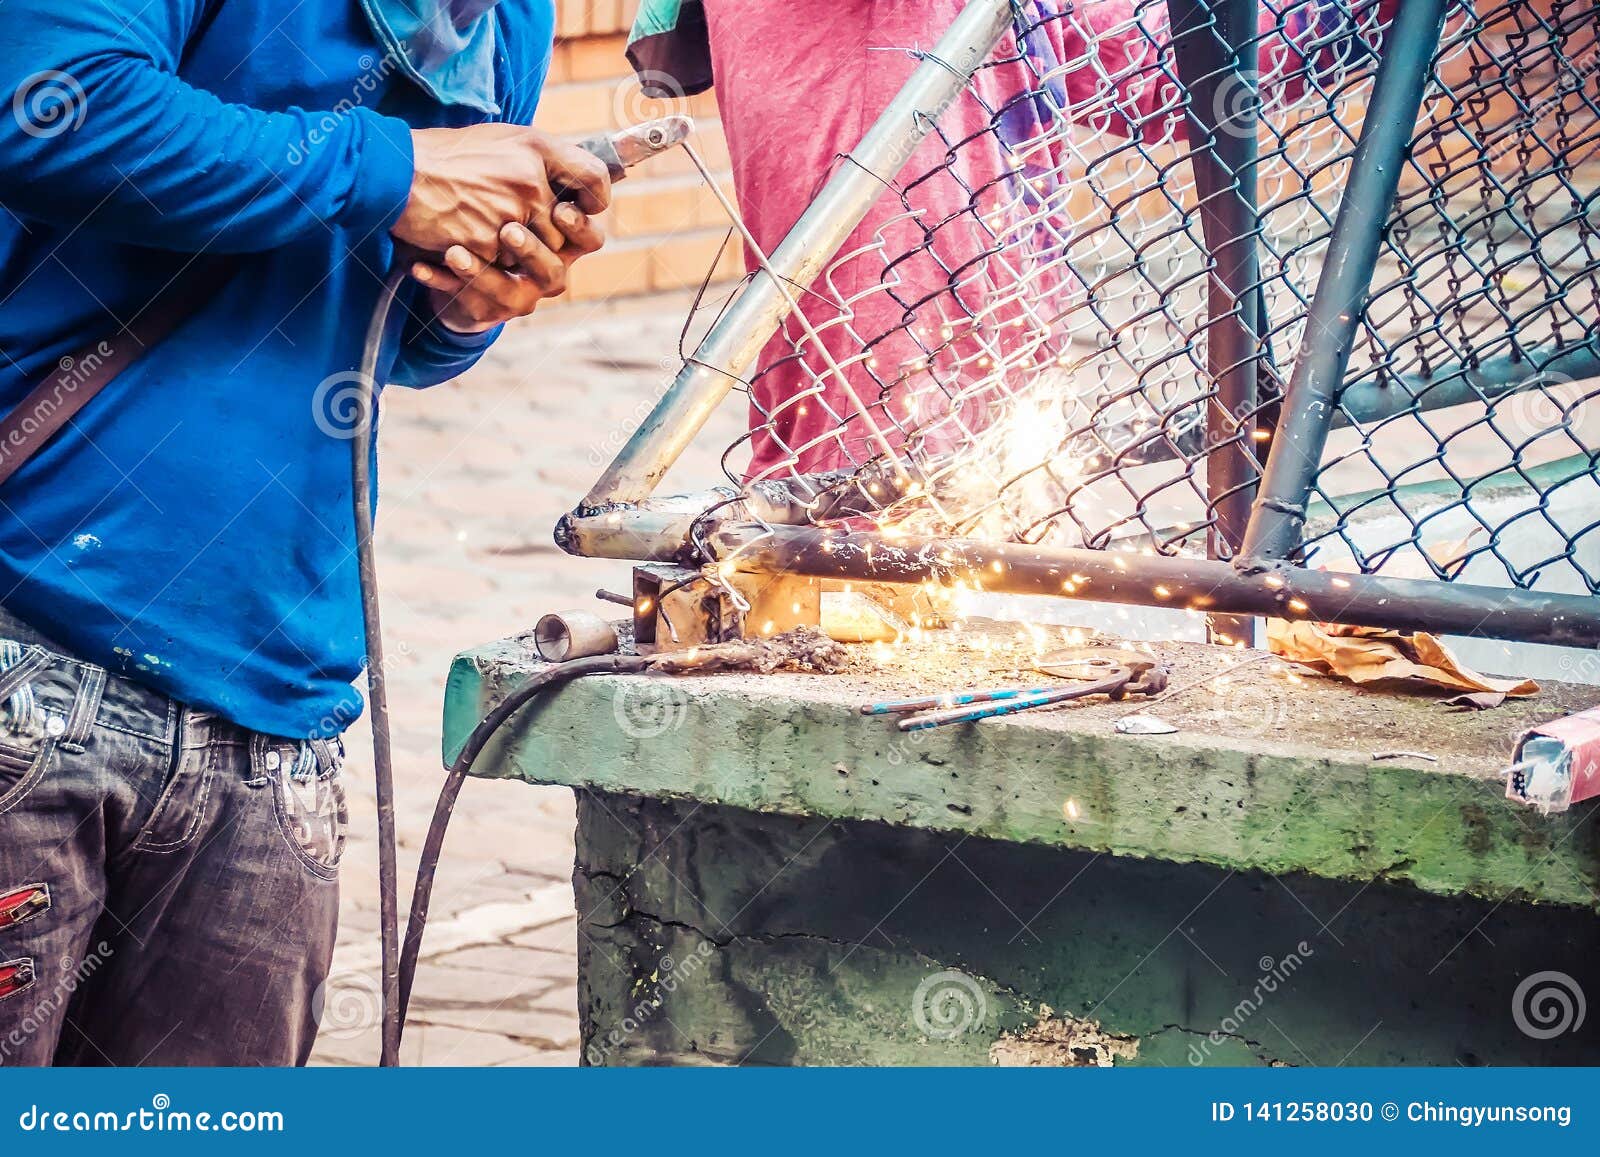 a strong man is a welder in a blue t-shirt,and welders leathers, a metal product is welded with a welding machine in the outdoor